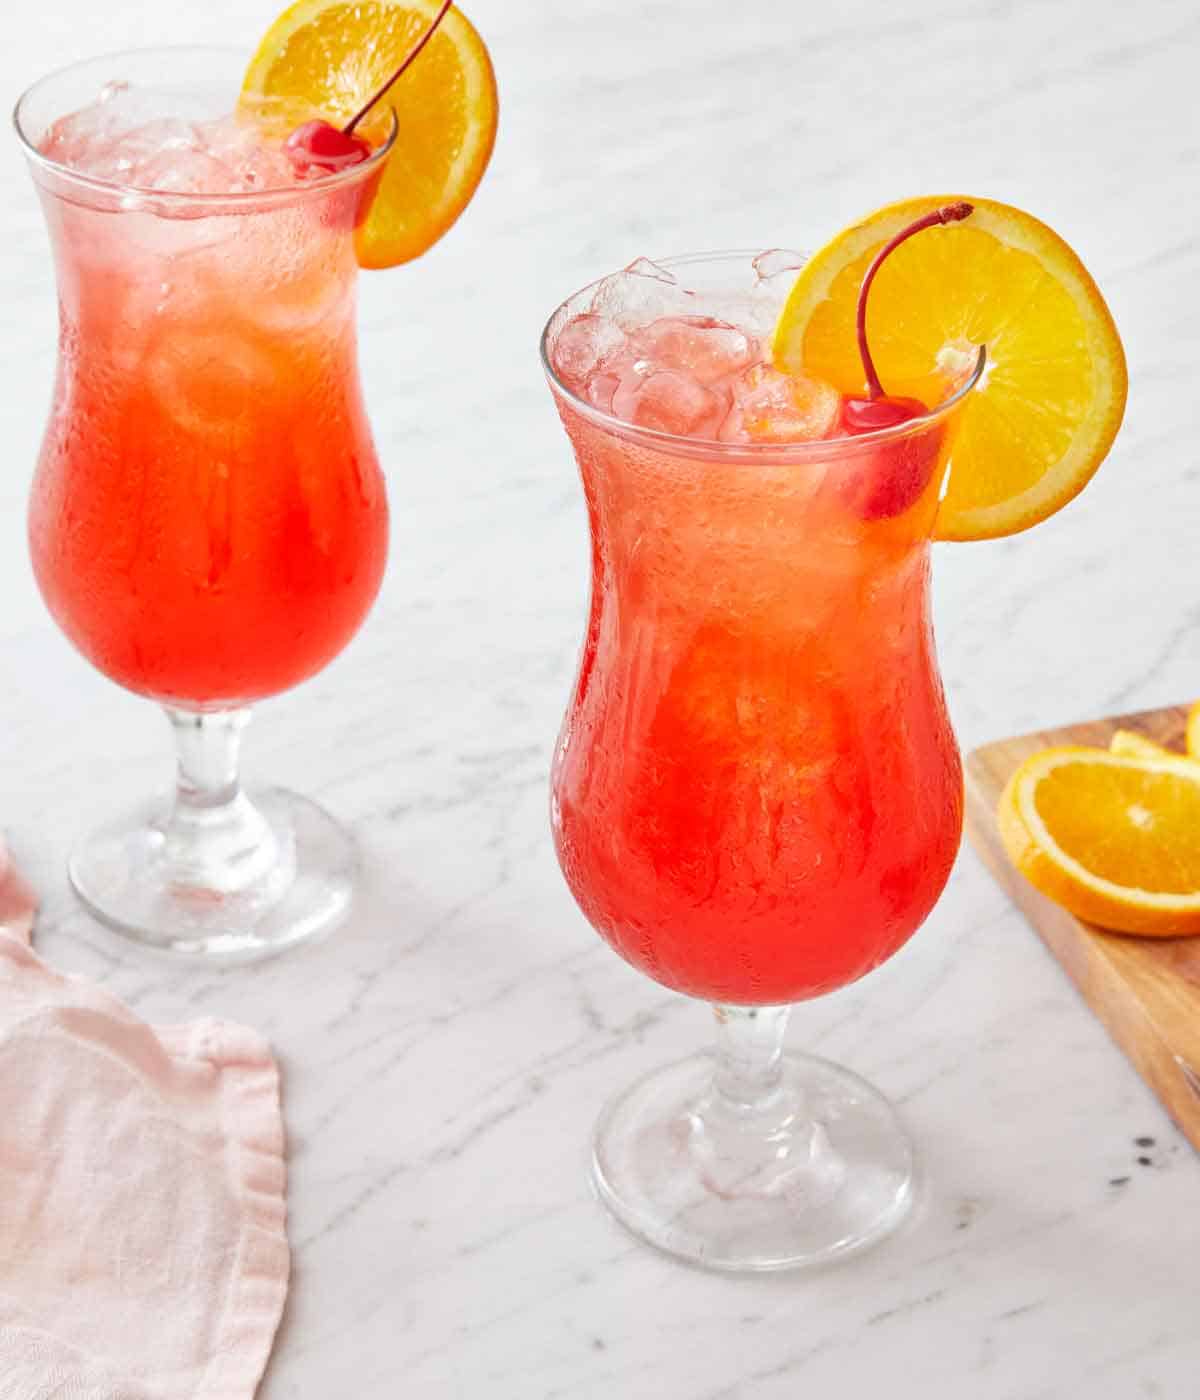 Two glasses of hurricane drink with an orange slice and cherry as a garnish.